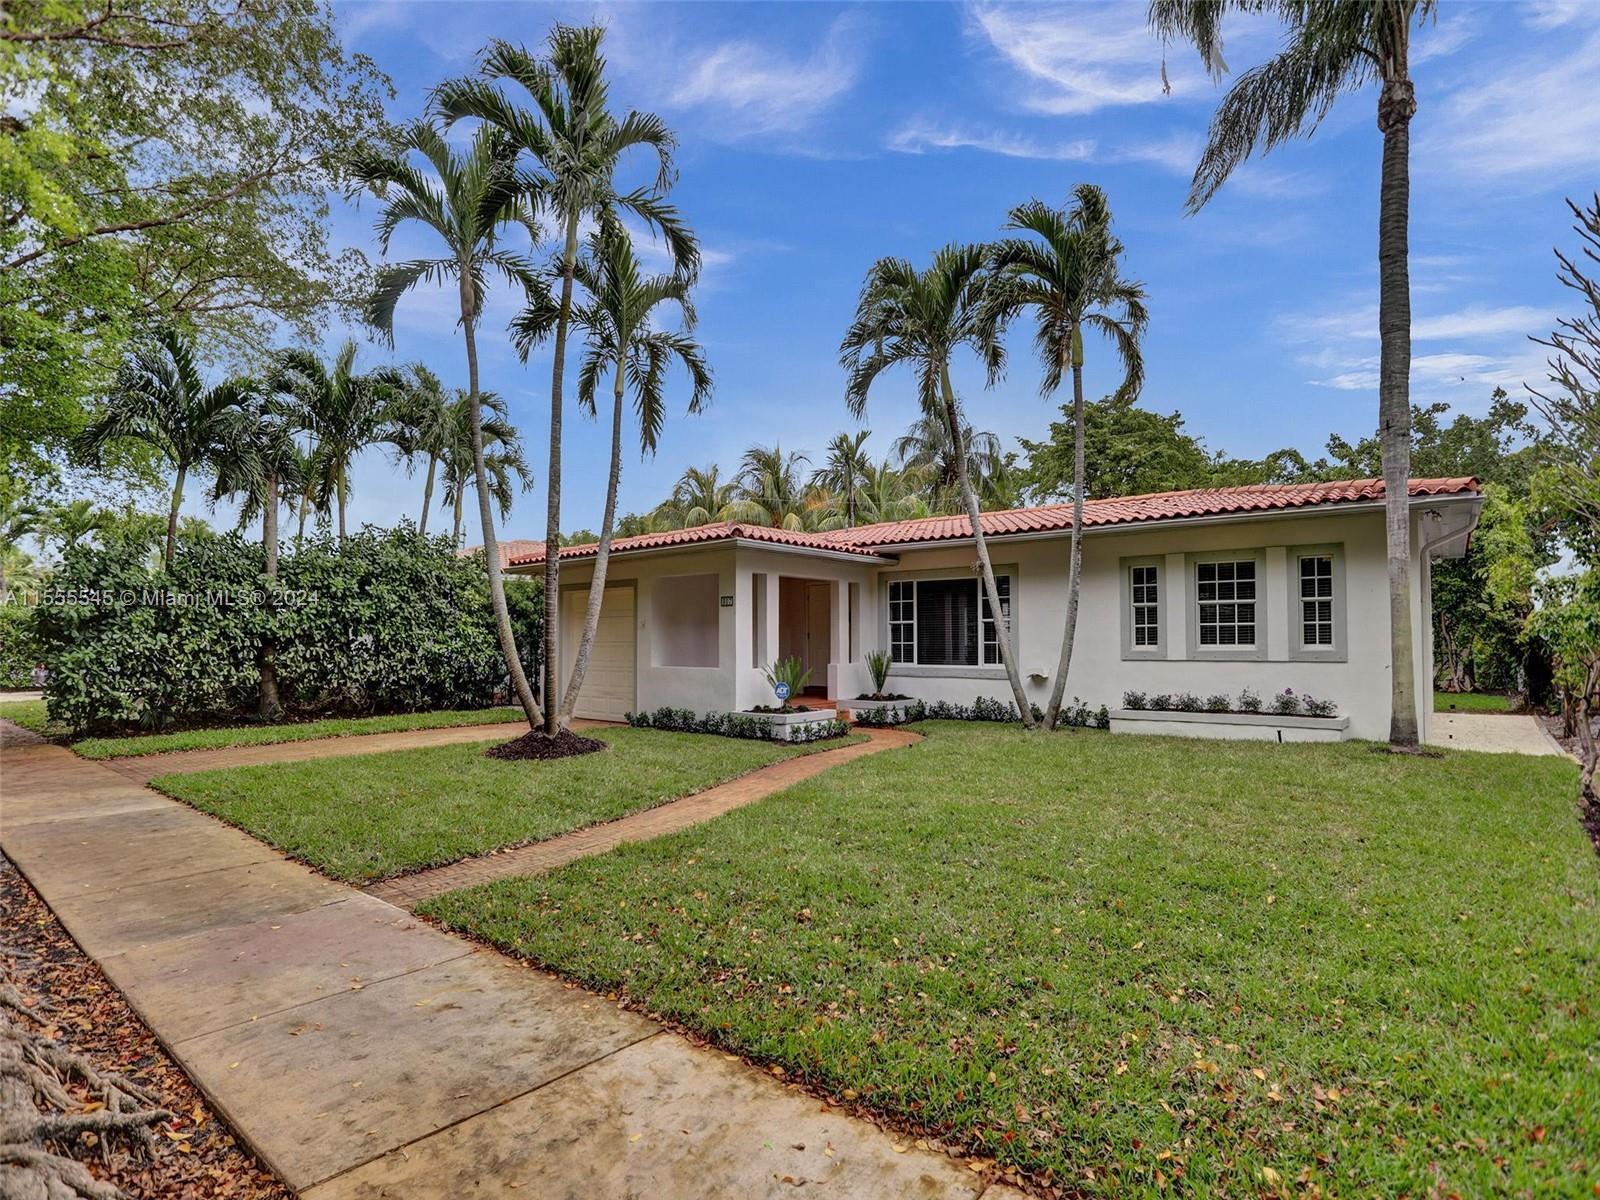 Photo of 307 Candia Ave in Coral Gables, FL